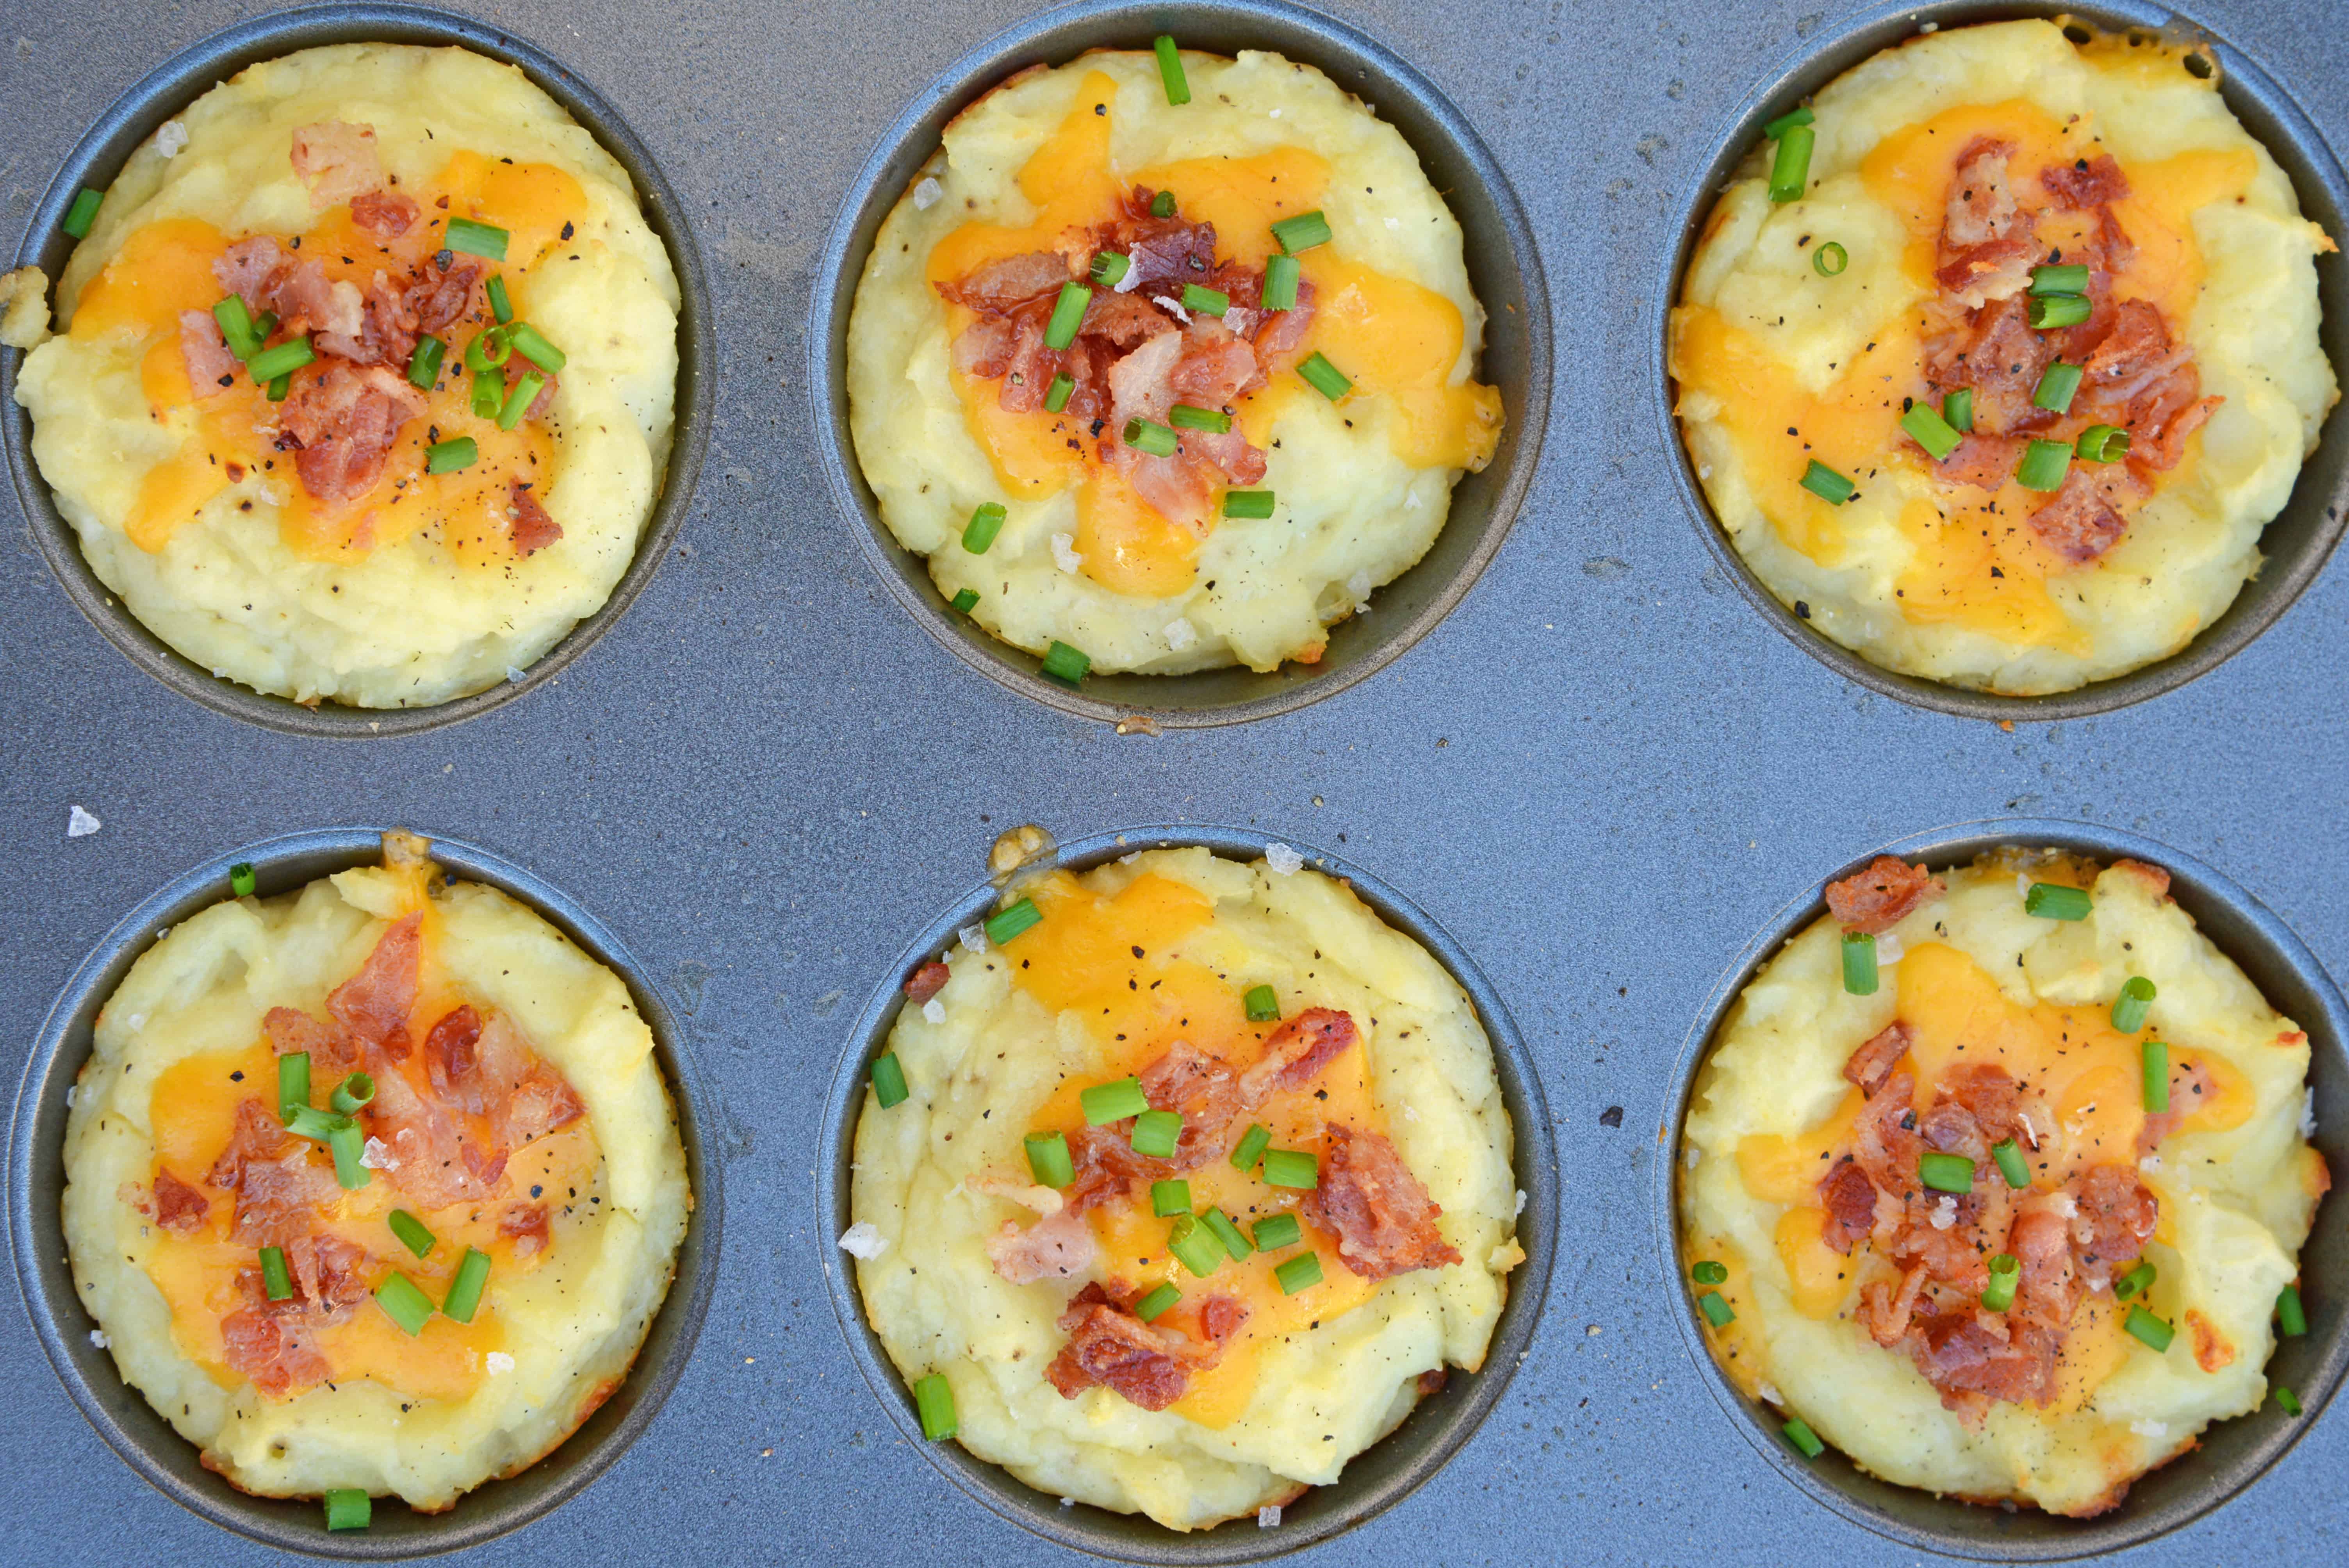 Loaded Mashed Potato Cups are the best way to use leftover mashed potatoes. Mixed with cheese, eggs and a few other ingredients, you load them into a muffin tin and poof, you've got finger food mashed potatoes! #mashedpotatoes #mashedpotatocups www.savoryexperiments.com 